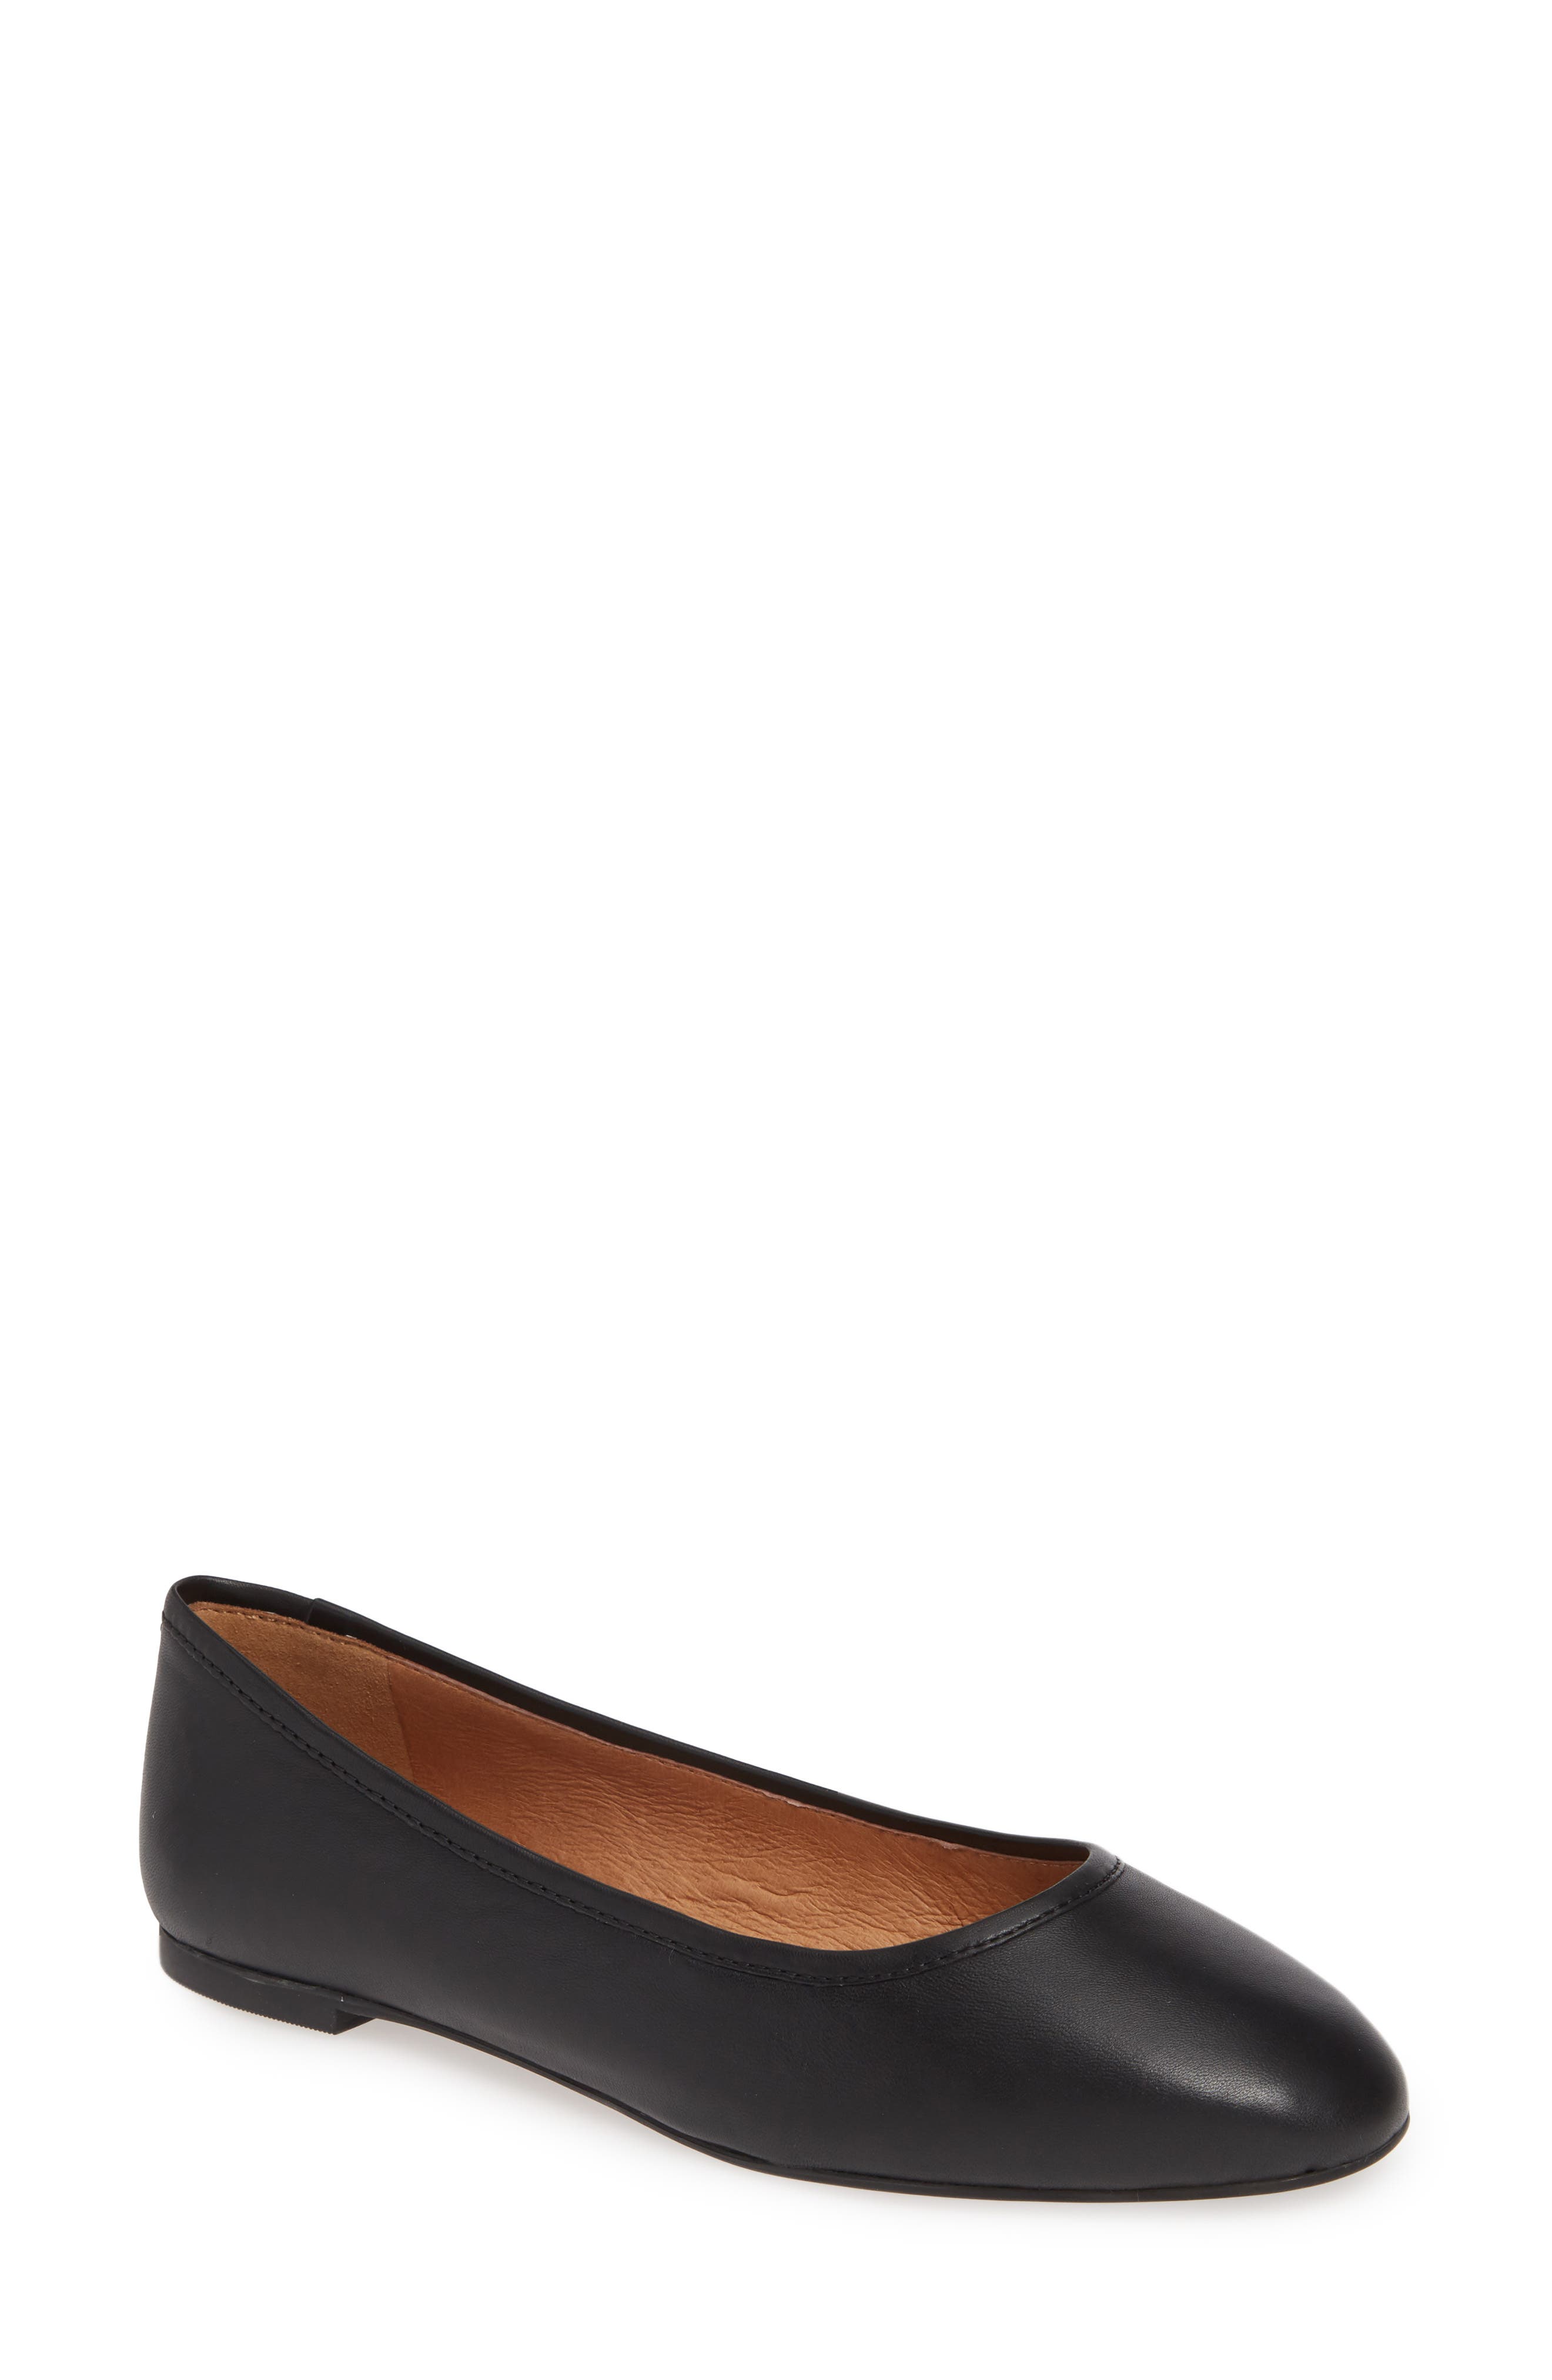 madewell flats nordstrom